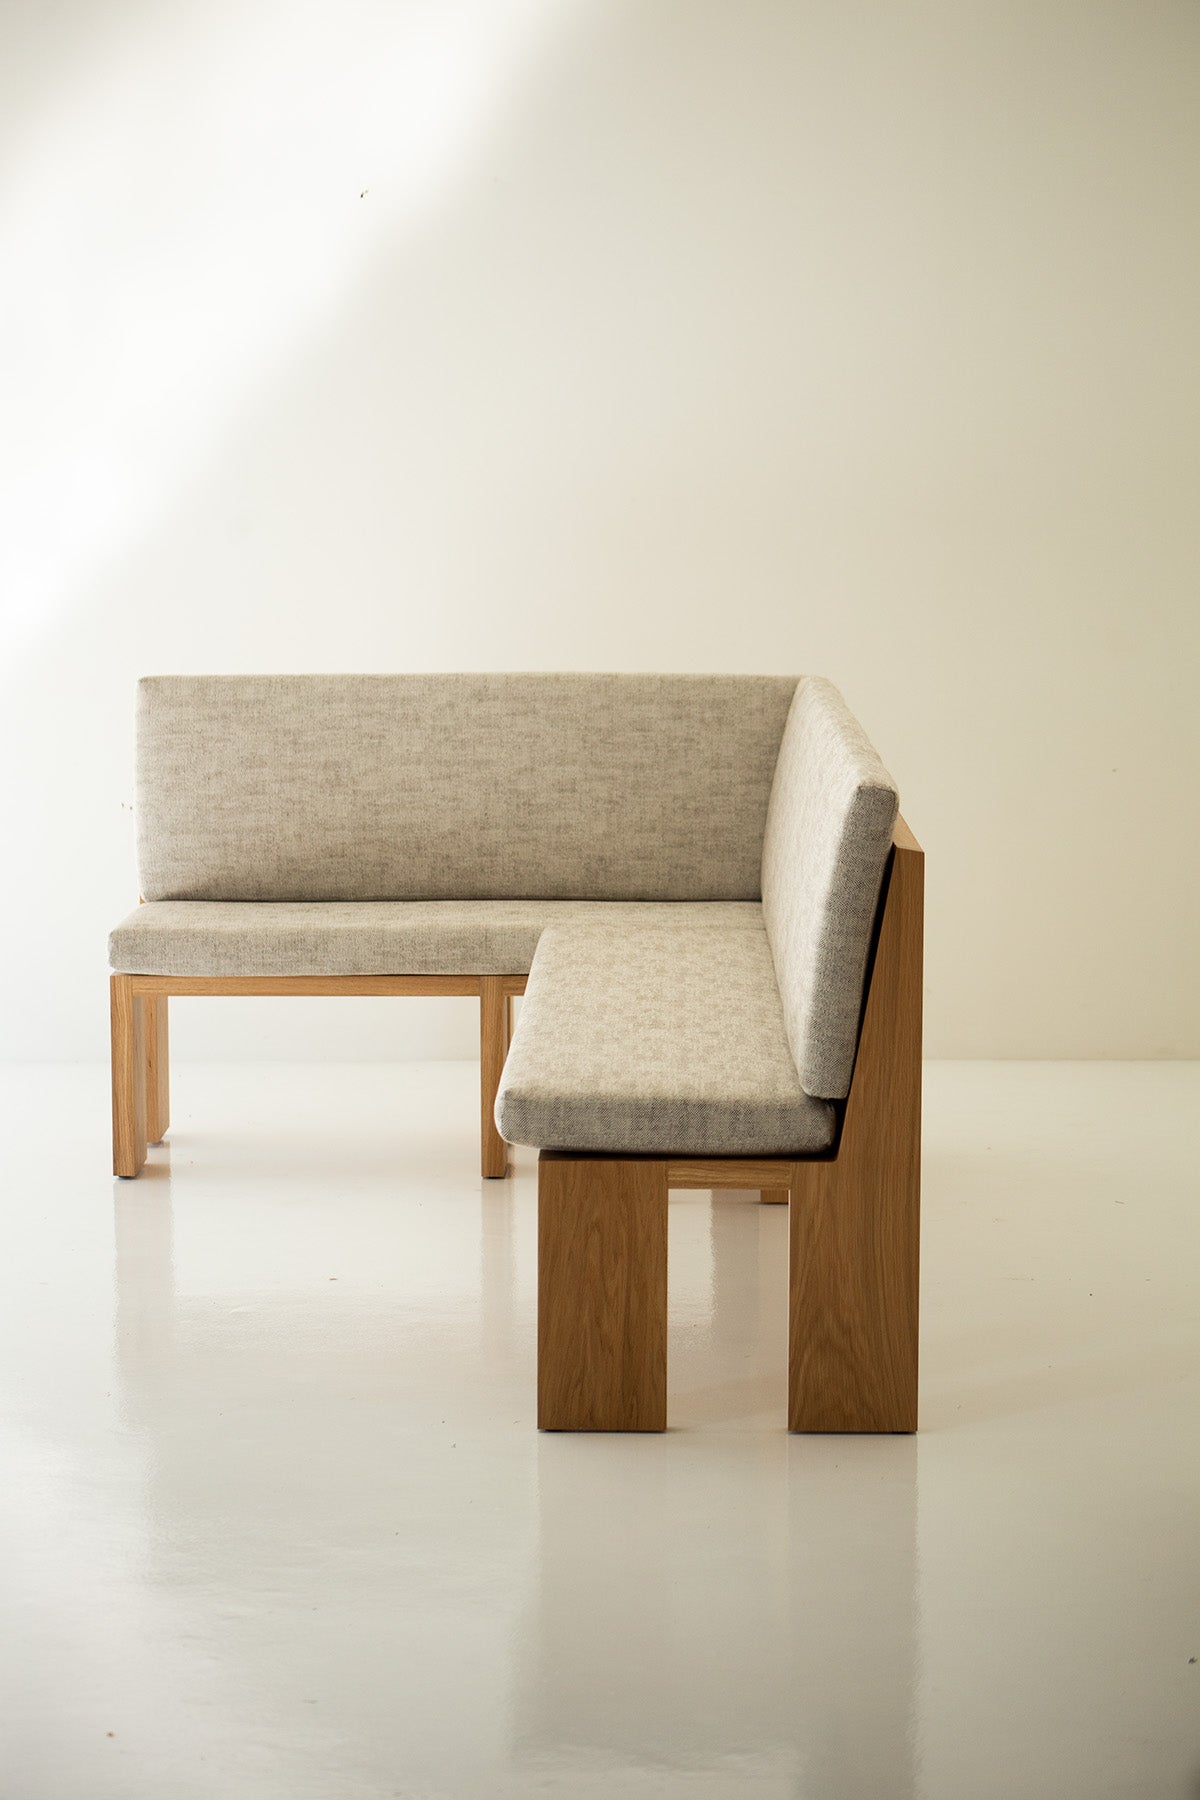 Banquette règlable neuve, made in italy !